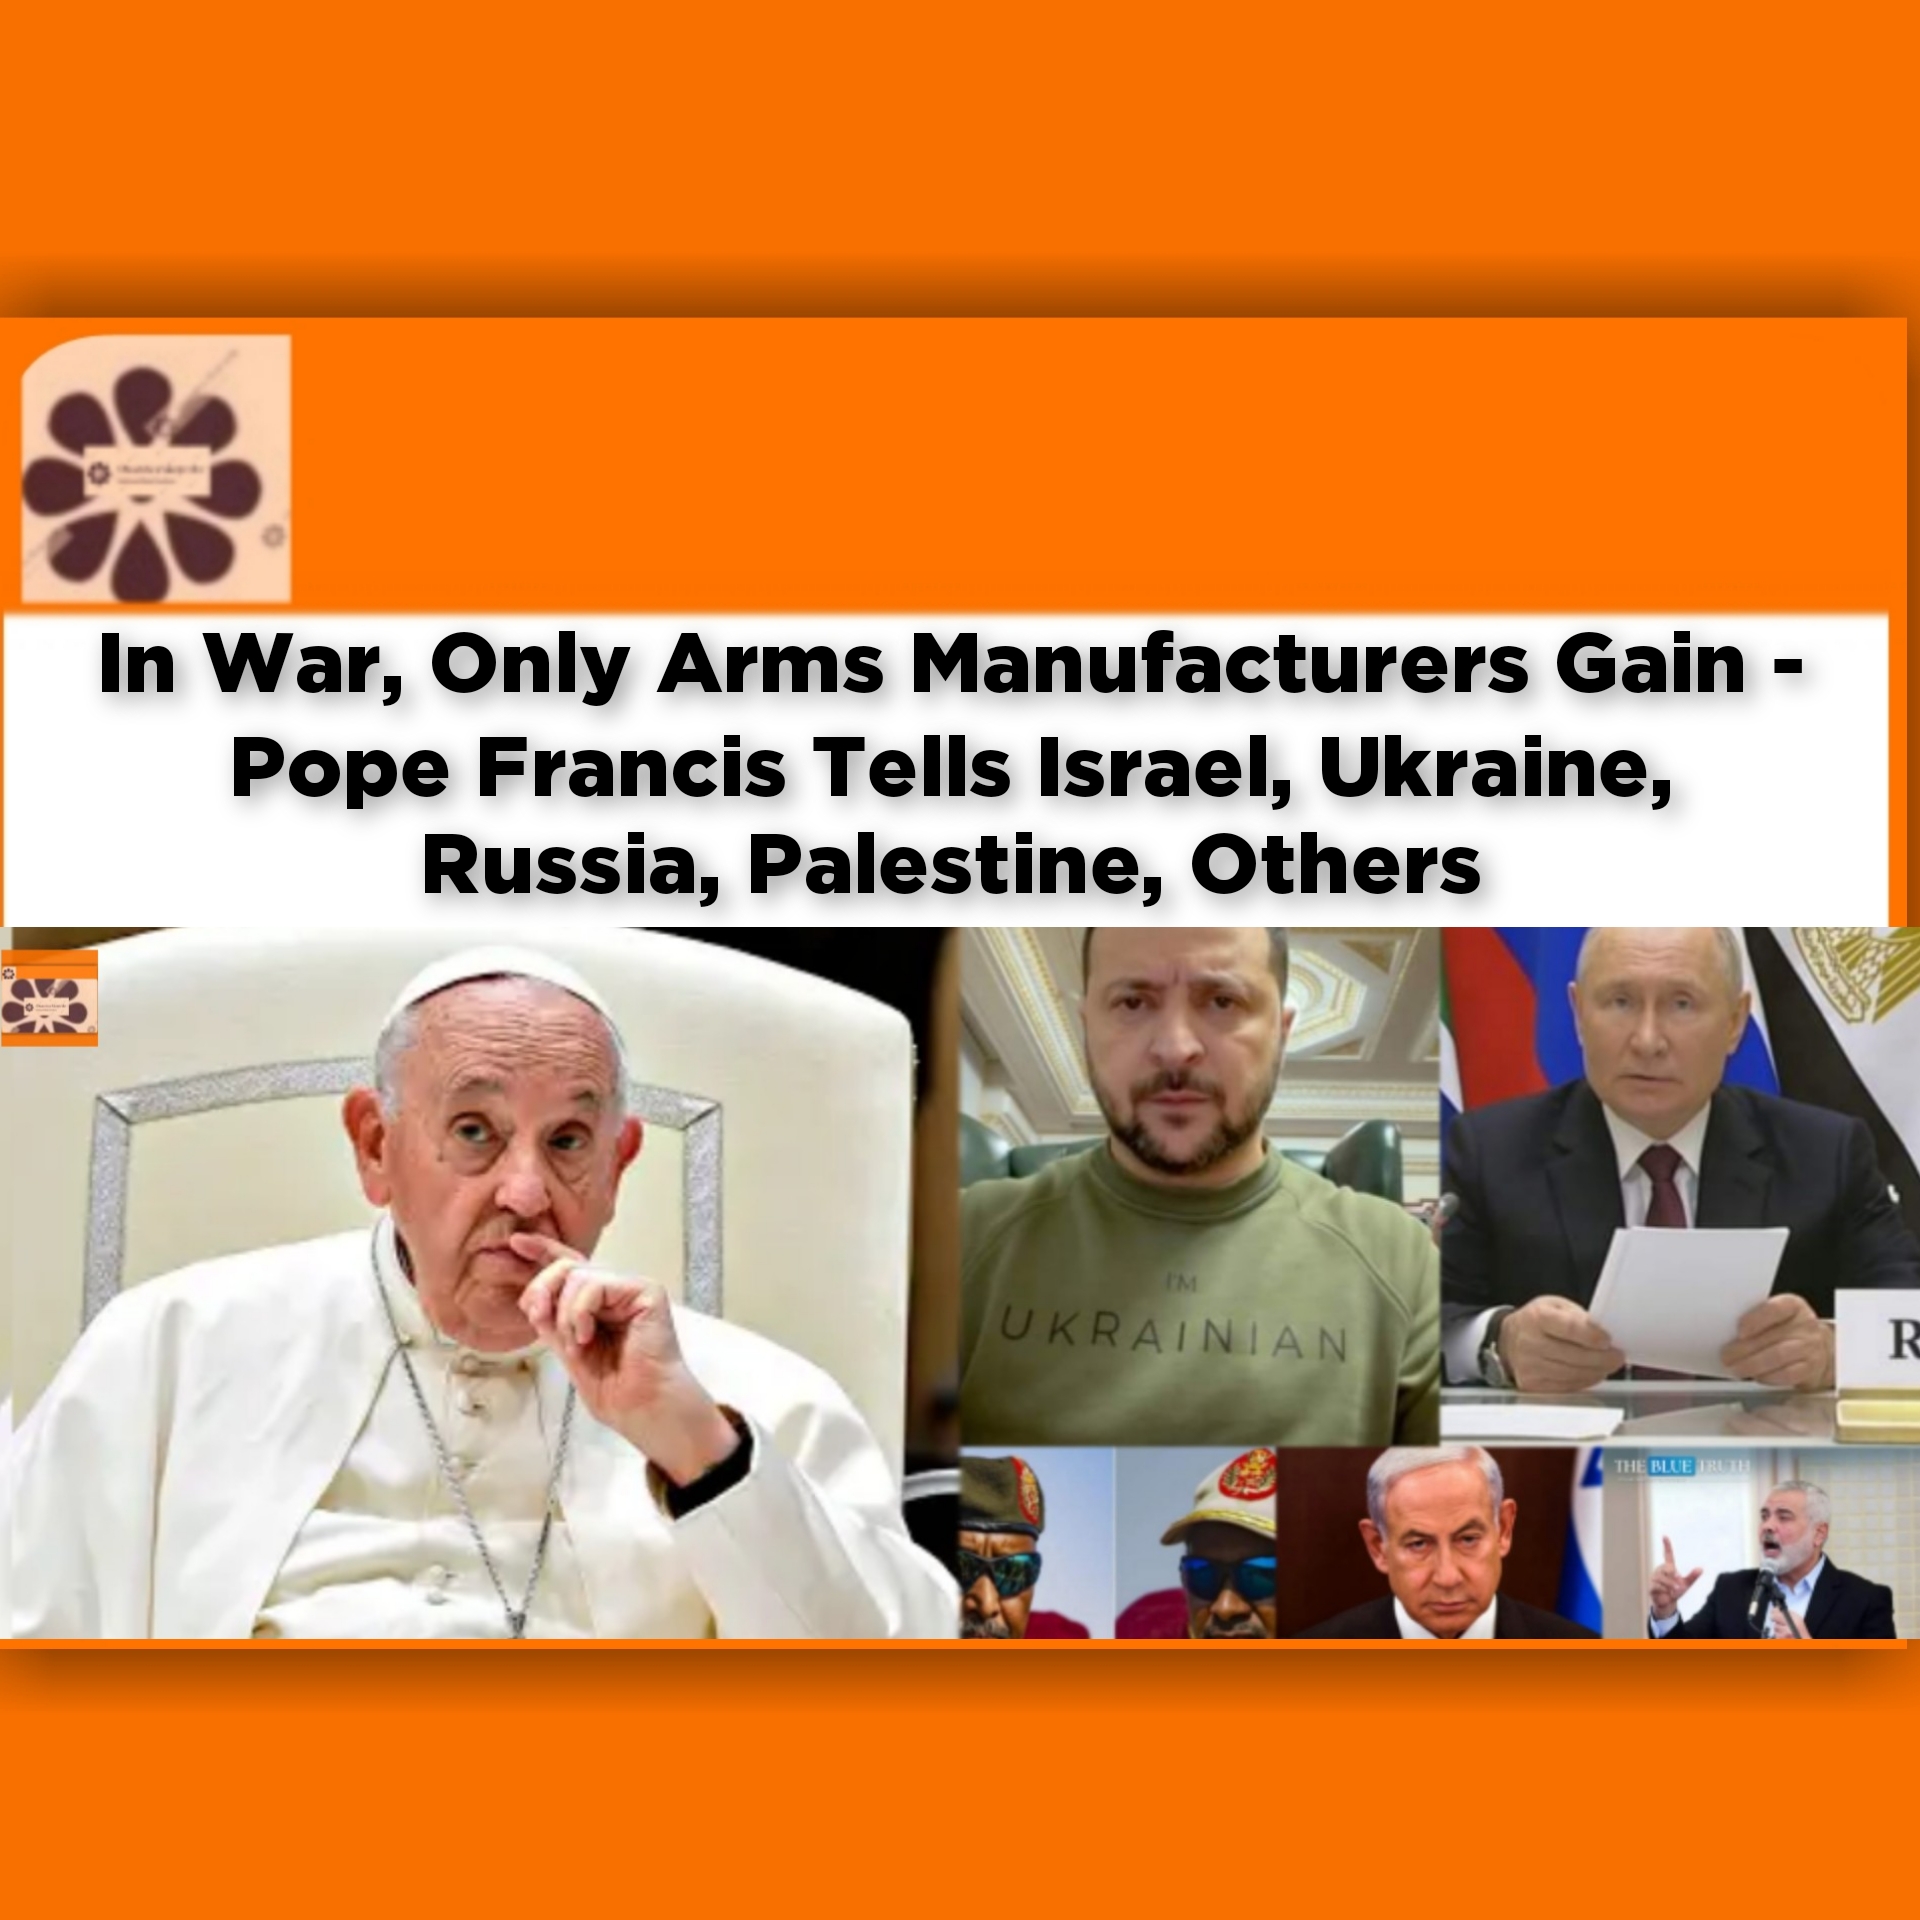 In War, Only Arms Manufacturers Gain - Pope Francis Tells Israel, Ukraine, Russia, Palestine, Others ~ OsazuwaAkonedo #cbn